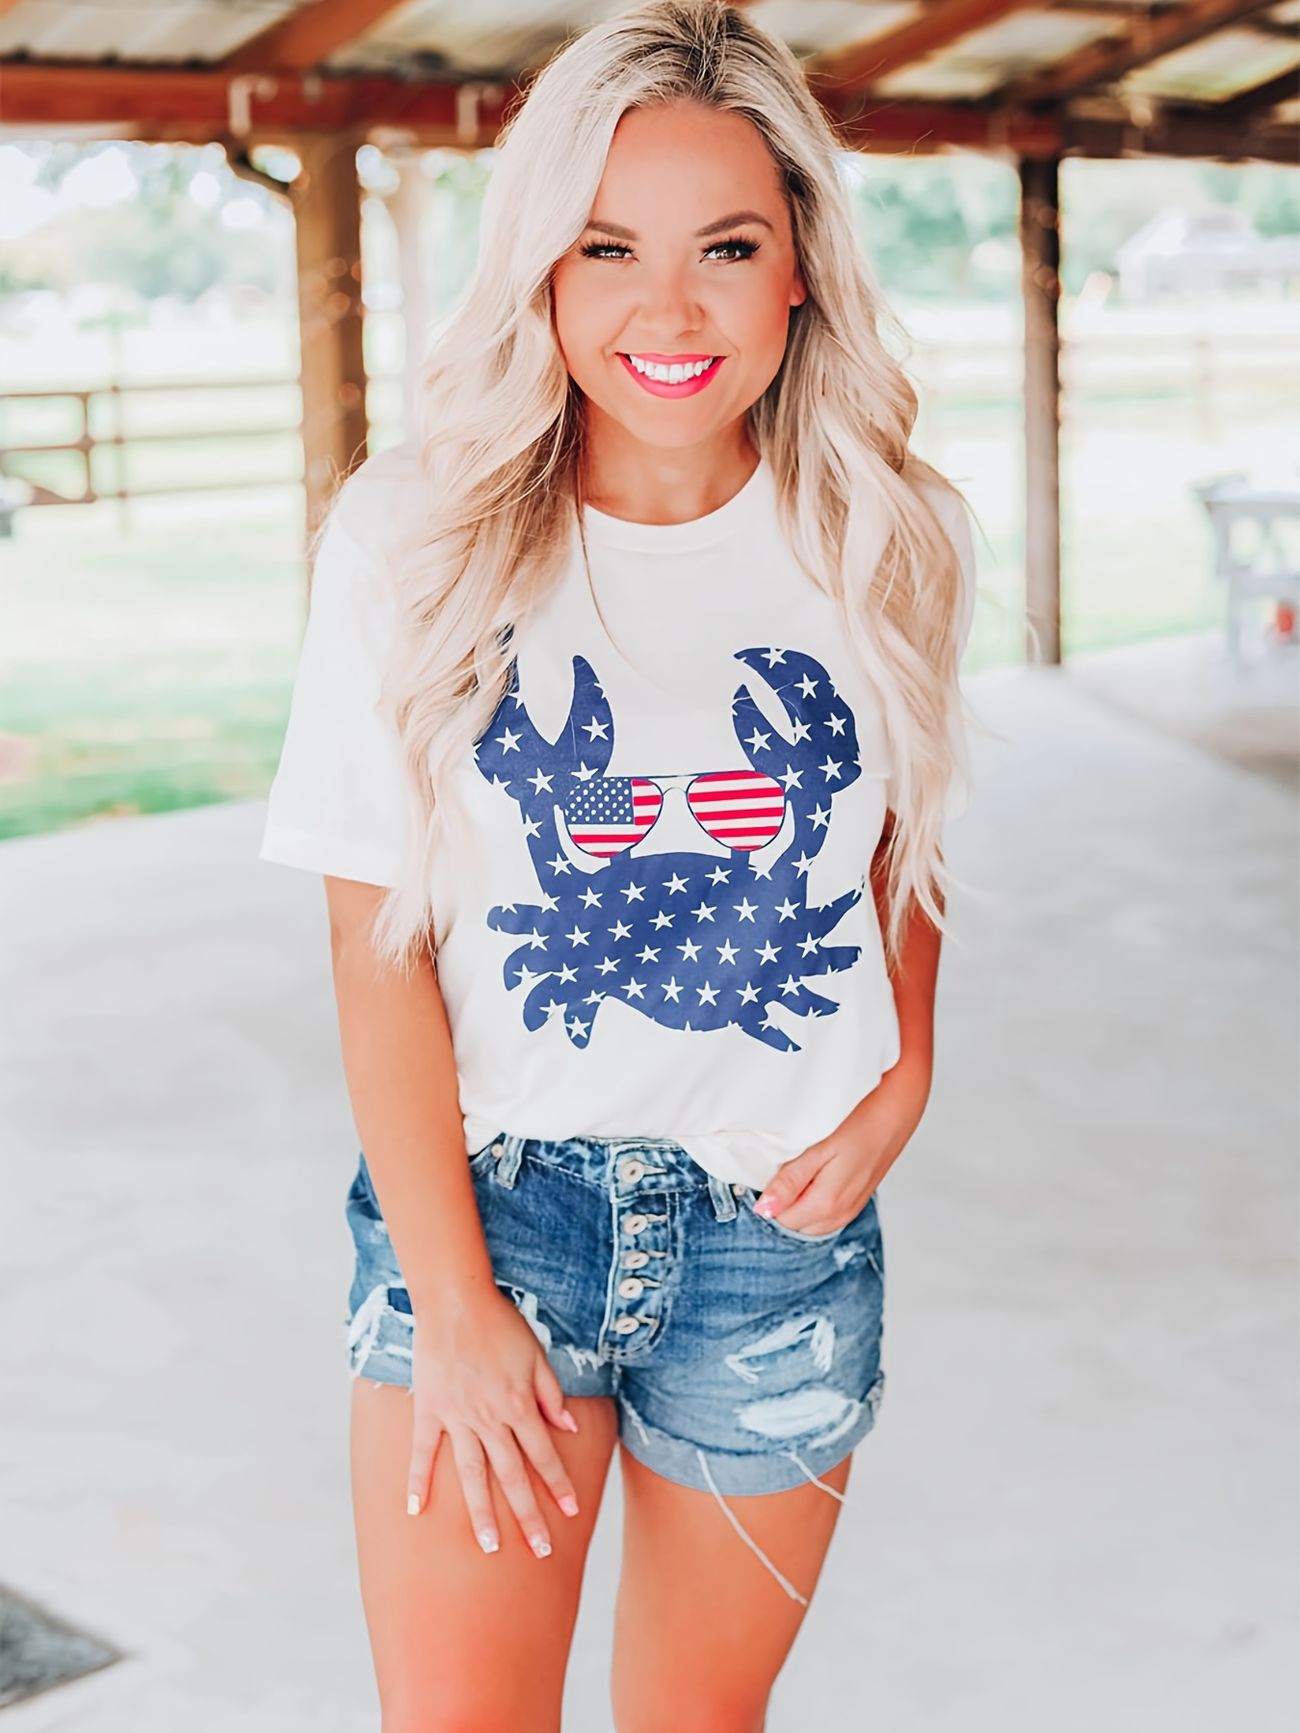 FREE & FAST Shipping Featured products S W C T Tops T A Flag P S S T-S C T  Tees L Fit C B W's C Tax-Free Free Shipping oltrans.bg